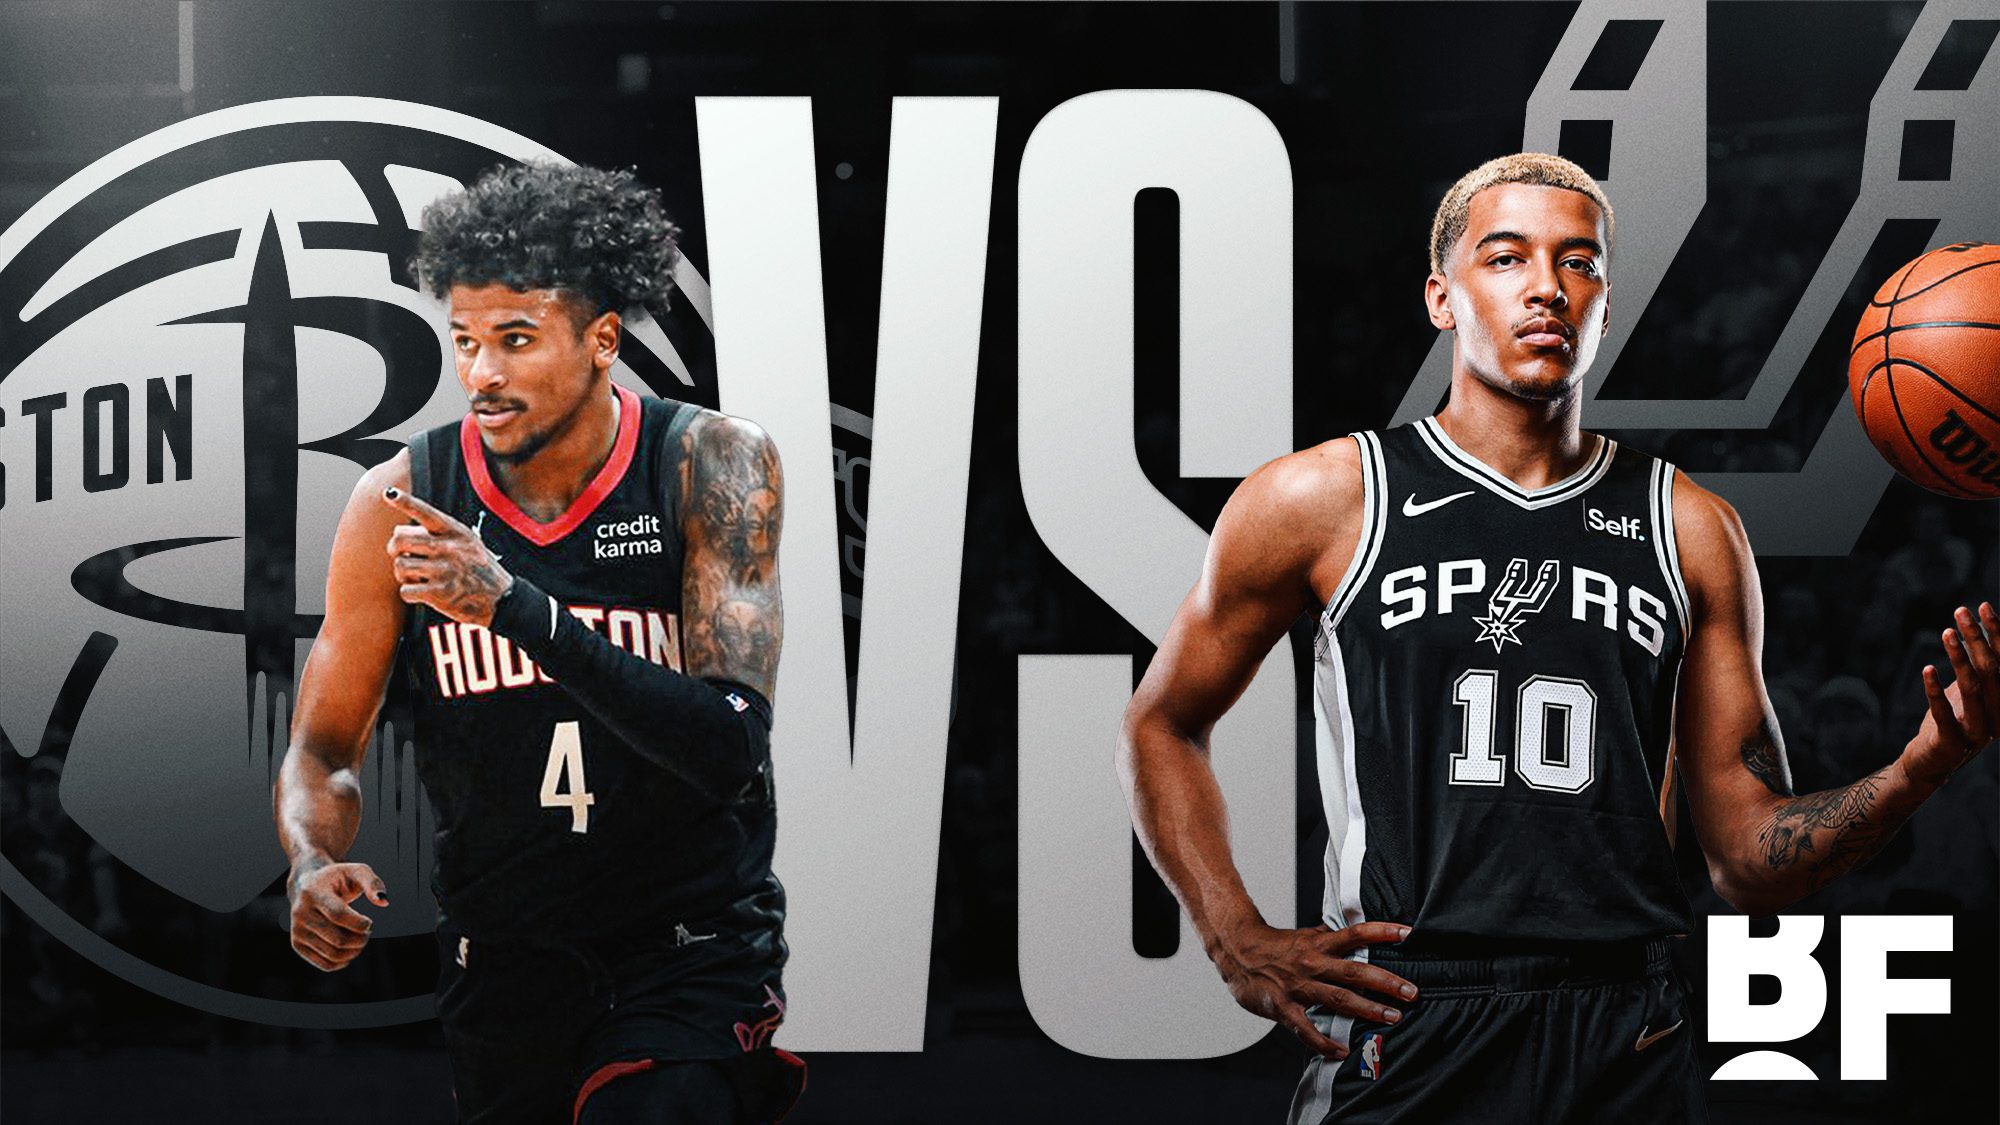 Will the Rockets Exploit the Spurs Injuries?